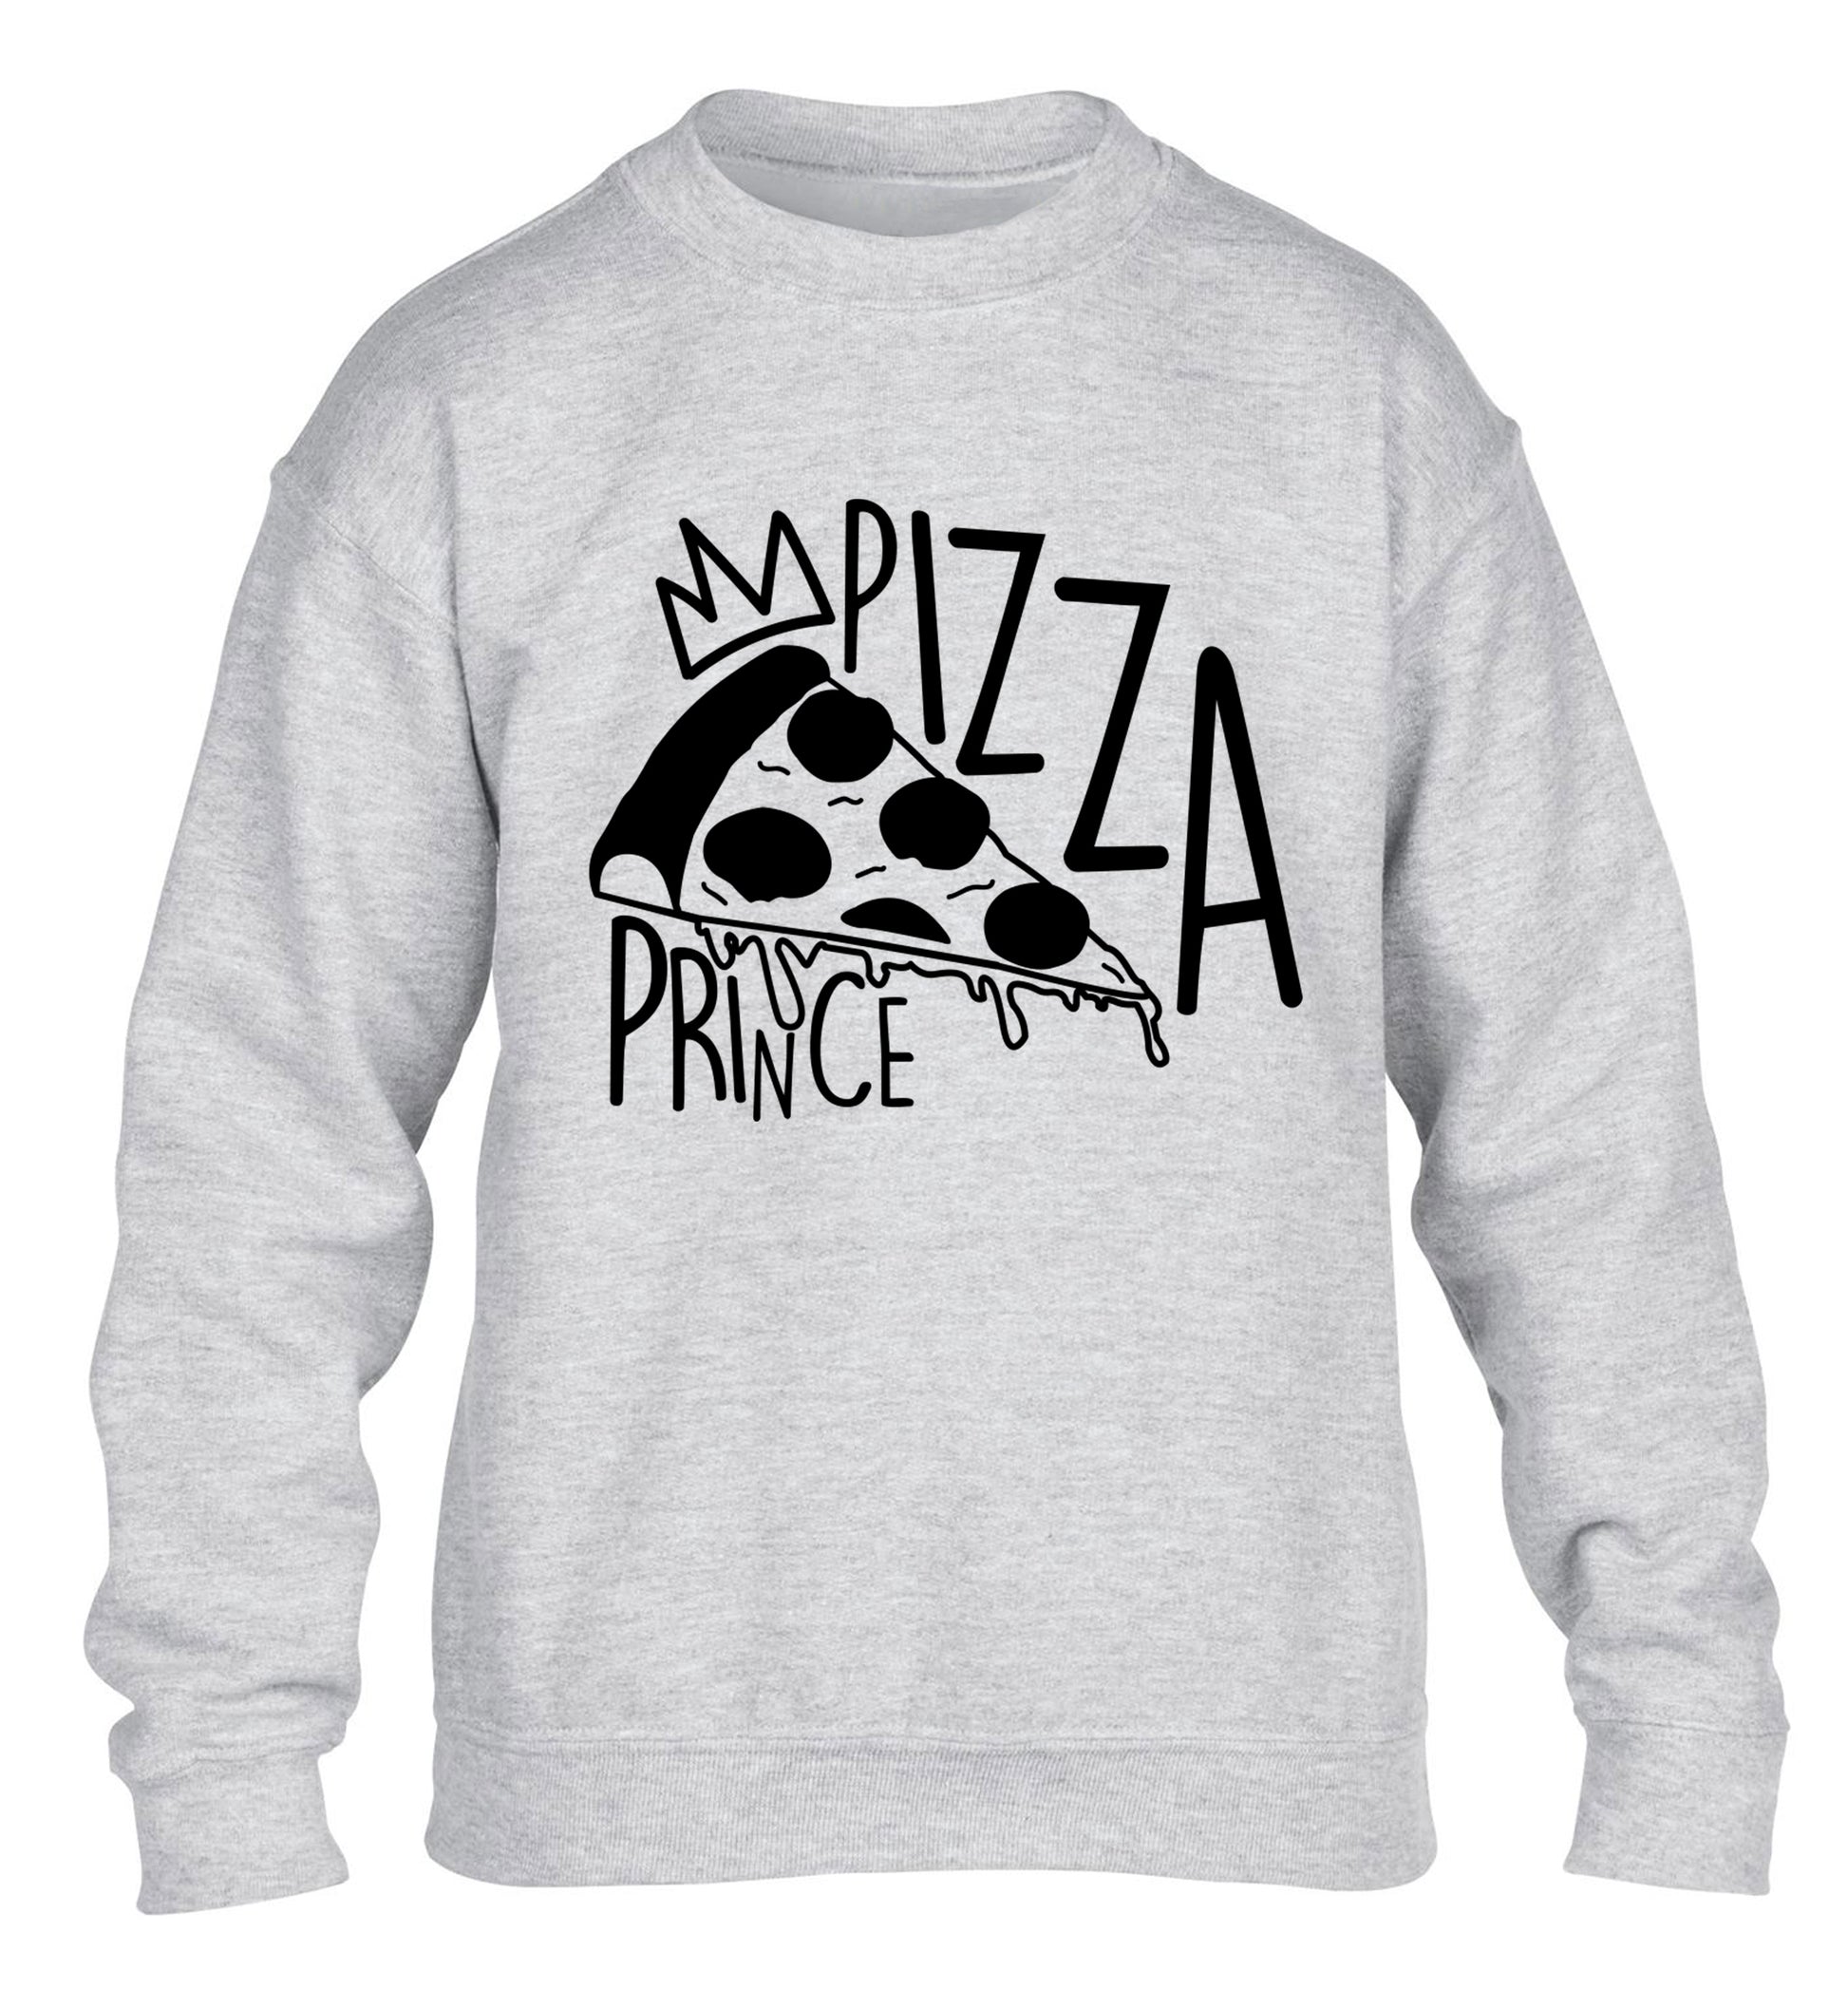 Pizza Prince children's grey sweater 12-13 Years